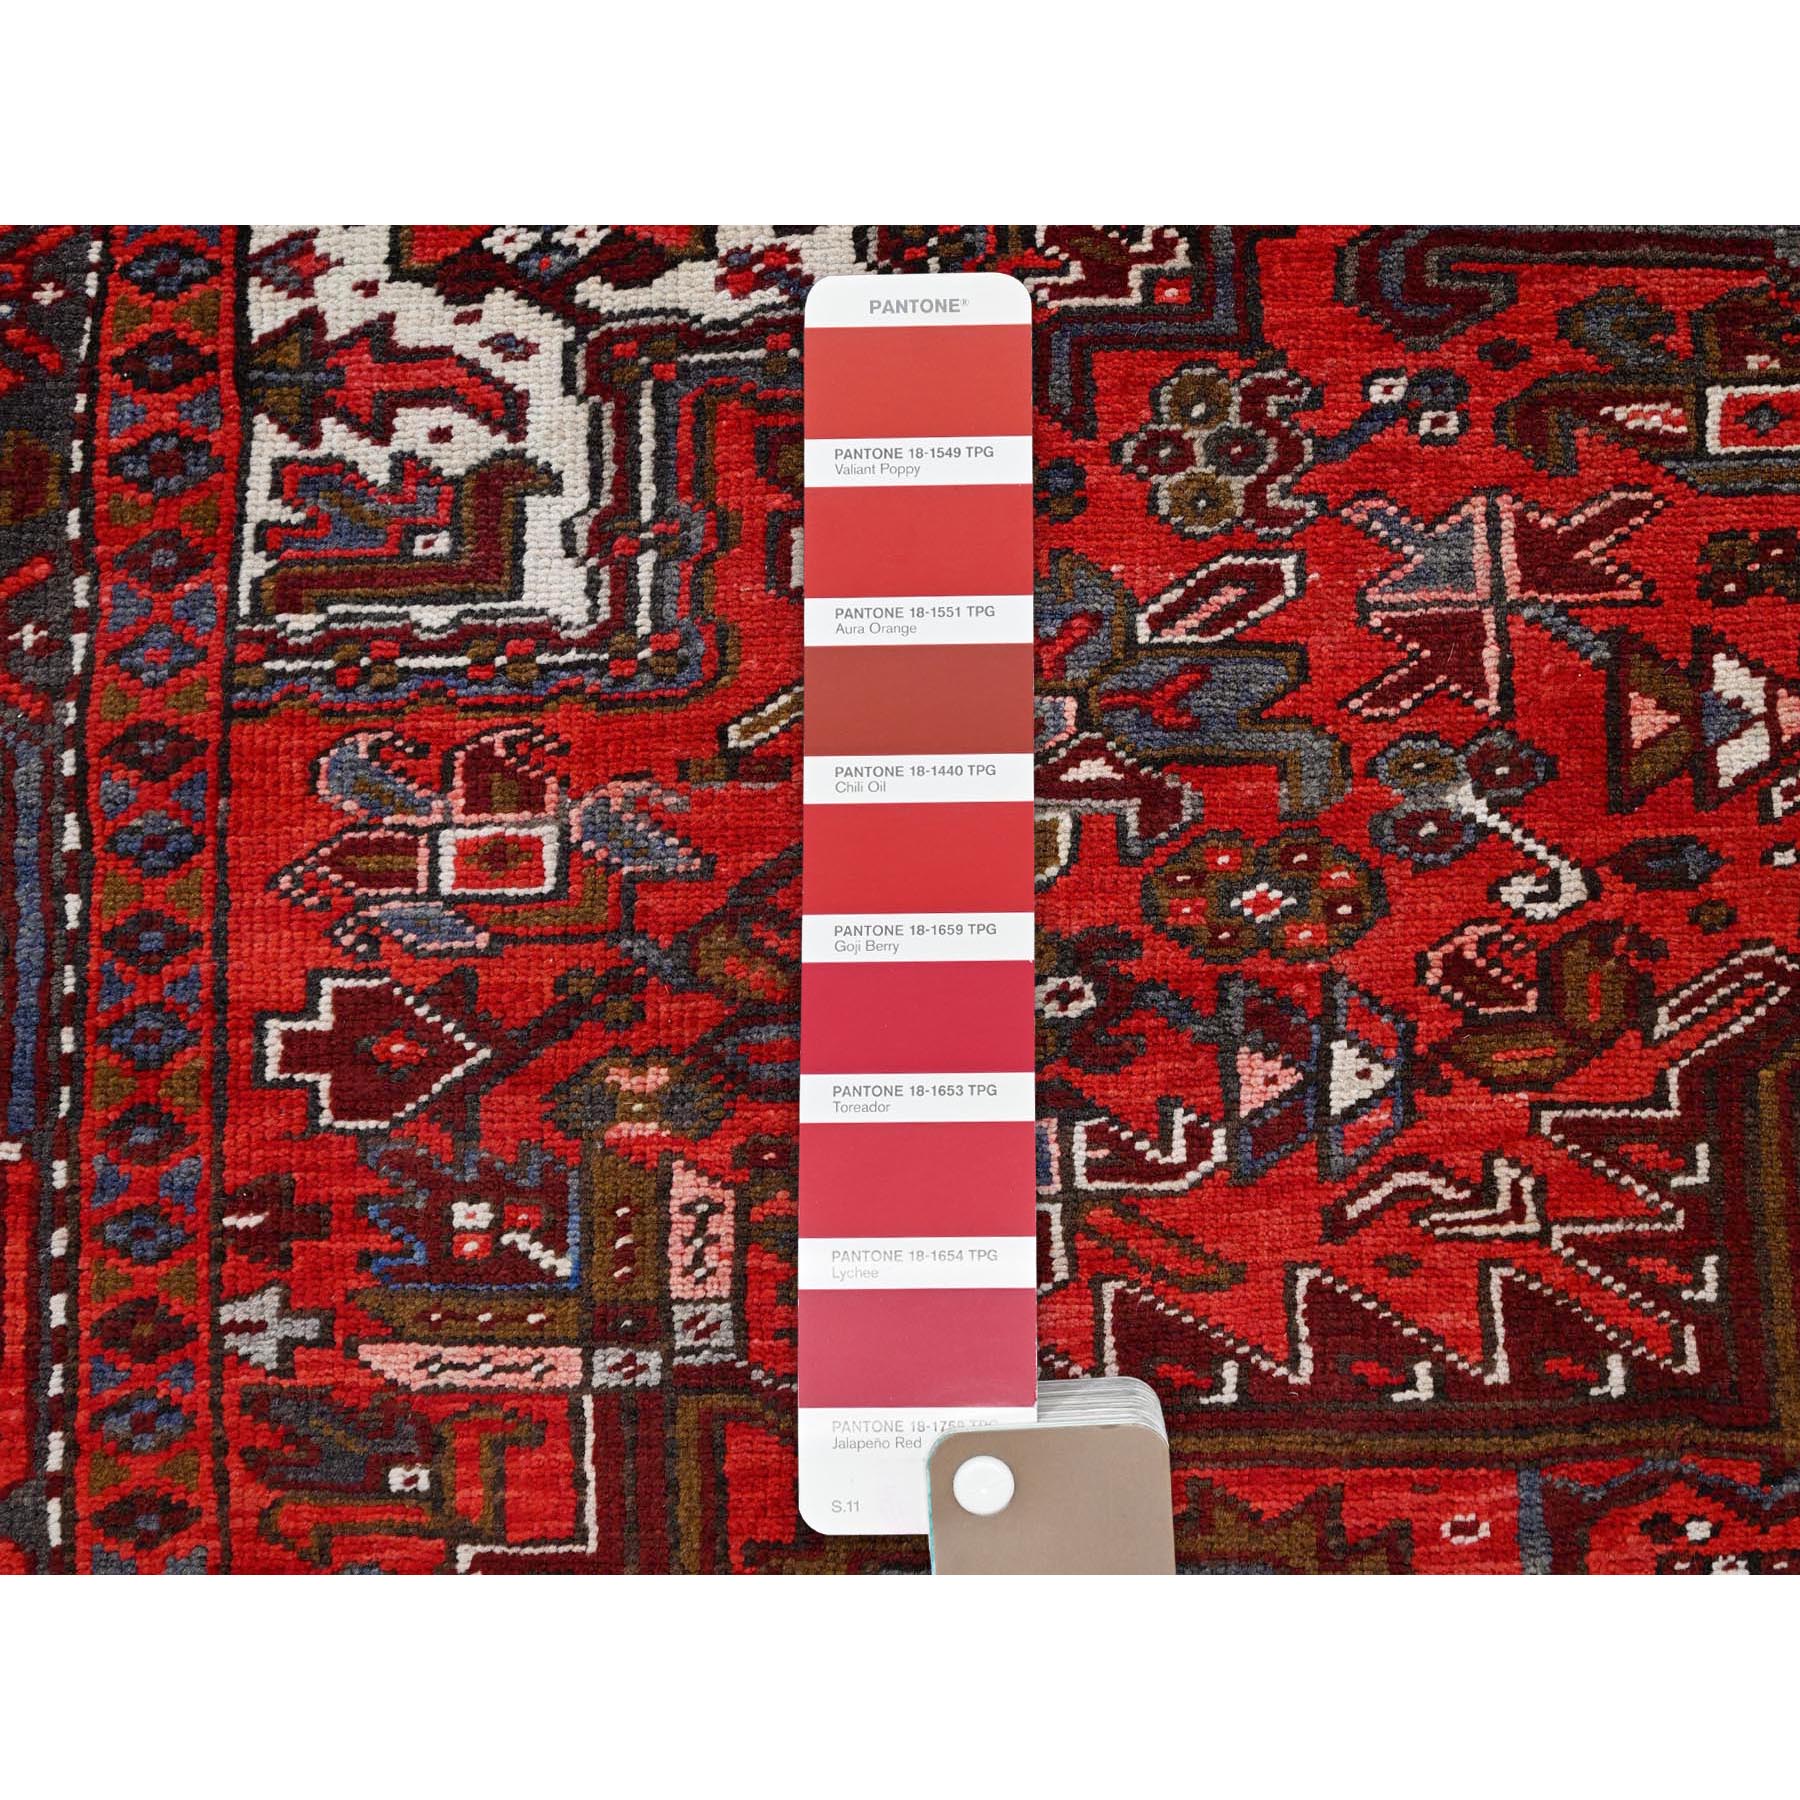 8'2"x11'3" Crimson Red, Good Condition, Distressed Feel, Evenly Worn, Pure Wool, Hand Woven, Semi Antique Persian Heriz with Tribal Ambience, Oriental Rug 